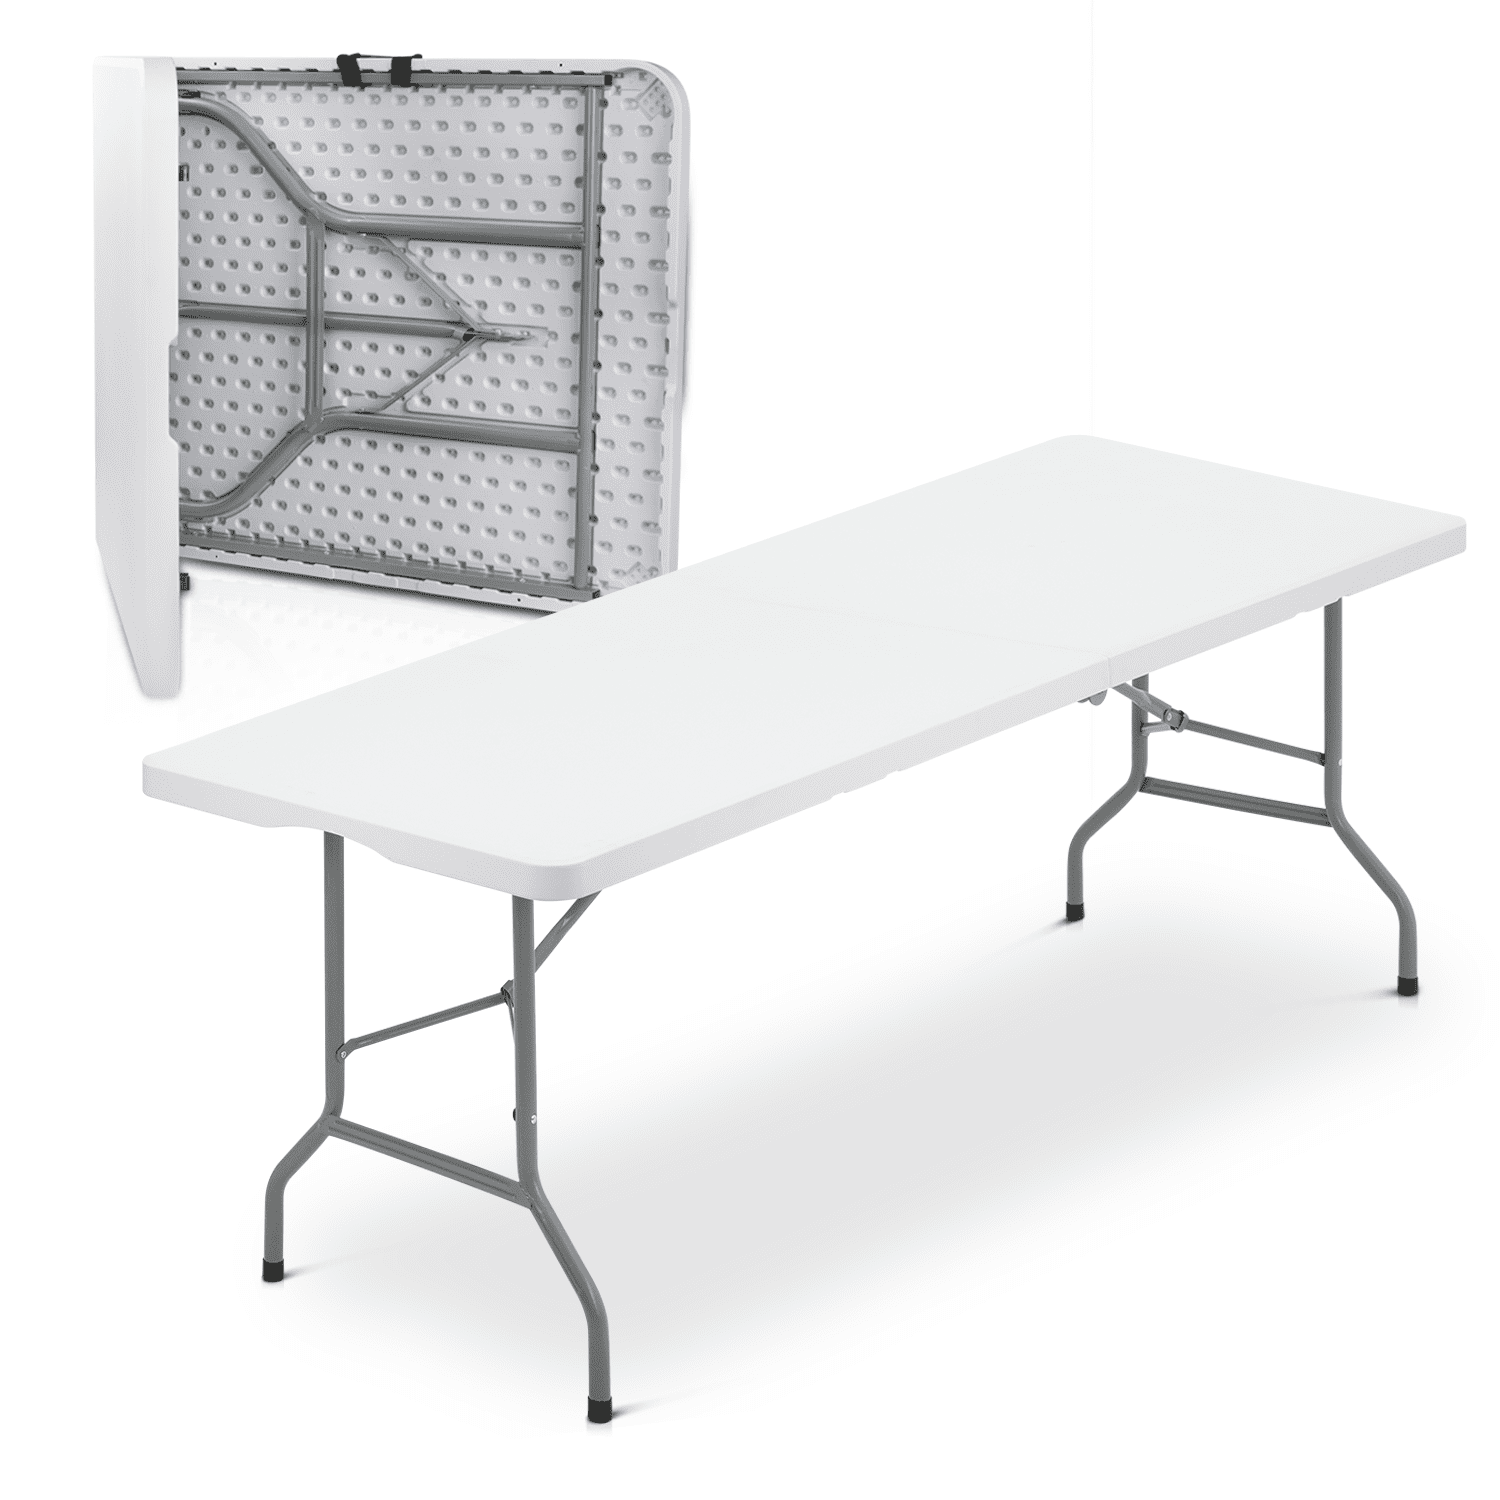 Magshion 8Ft Foldable Heavy Duty Table, Indoor Outdoor Portable